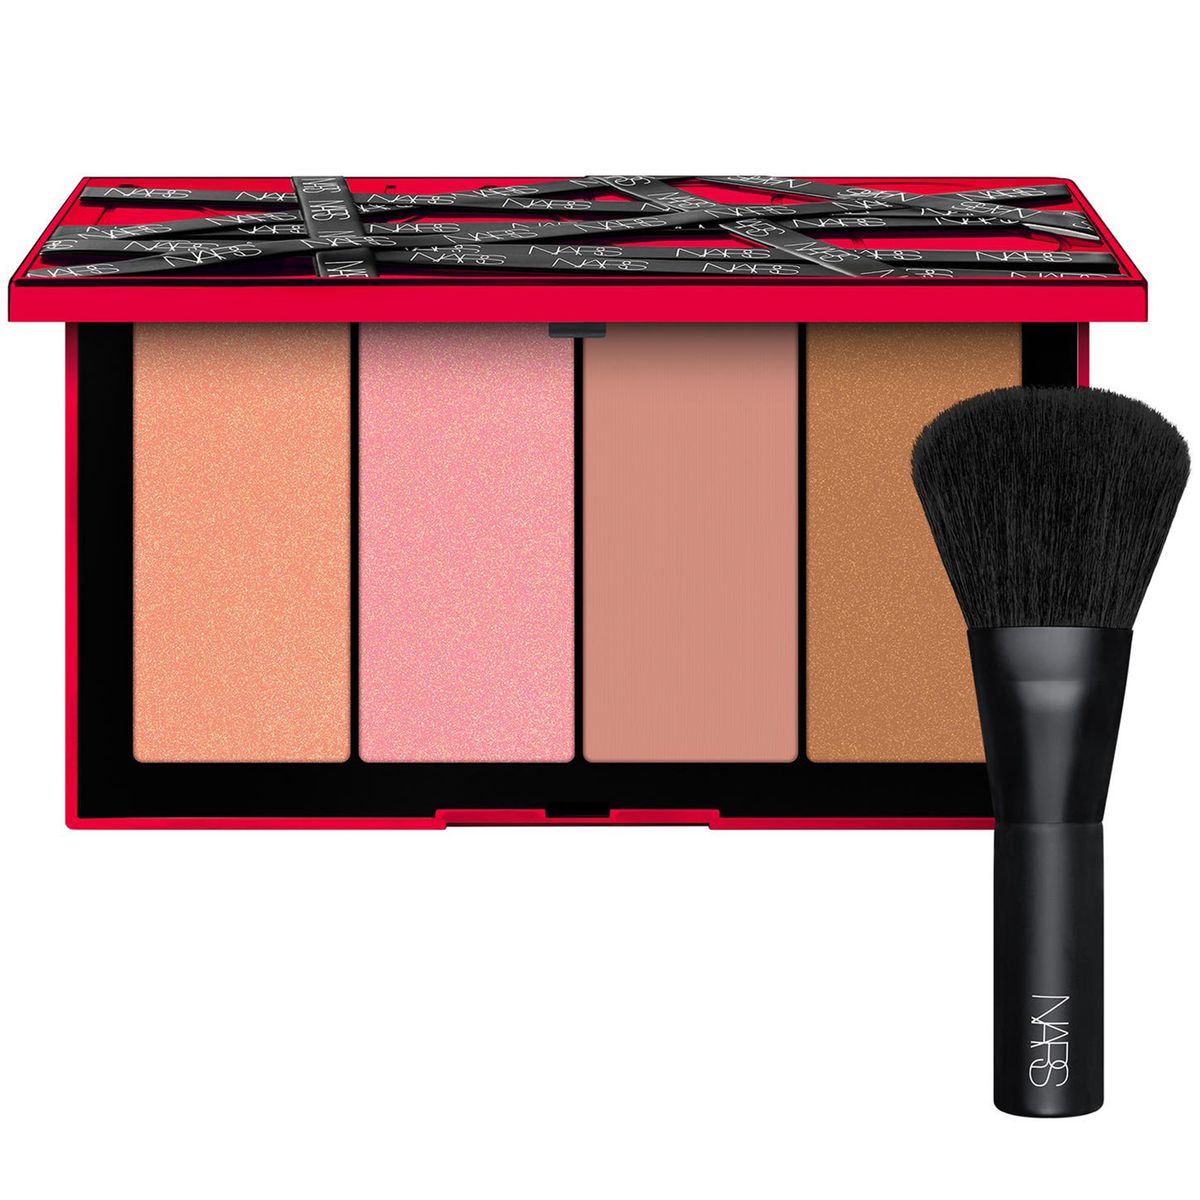 Nordstrom beauty gift sets